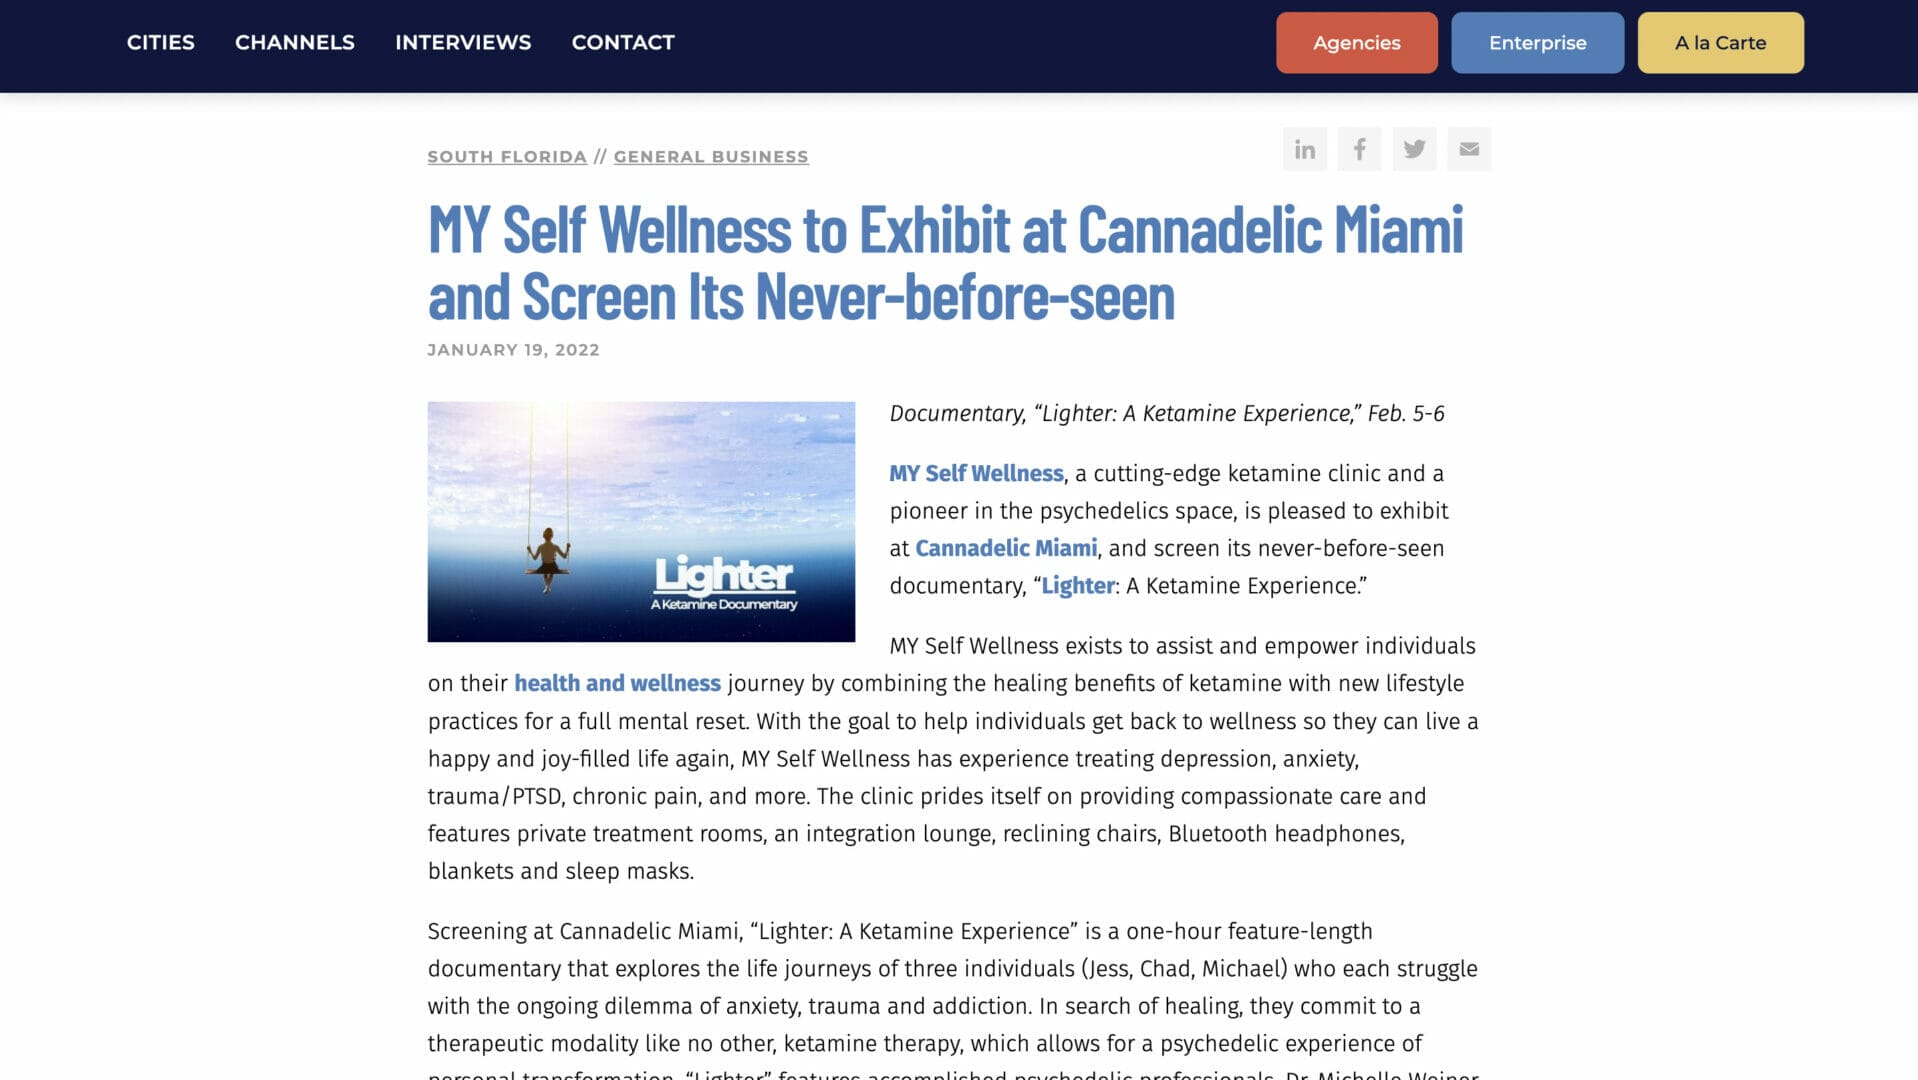 MY Self Wellness to Exhibit at Cannadelic Miami and Screen Its Never-before-seen